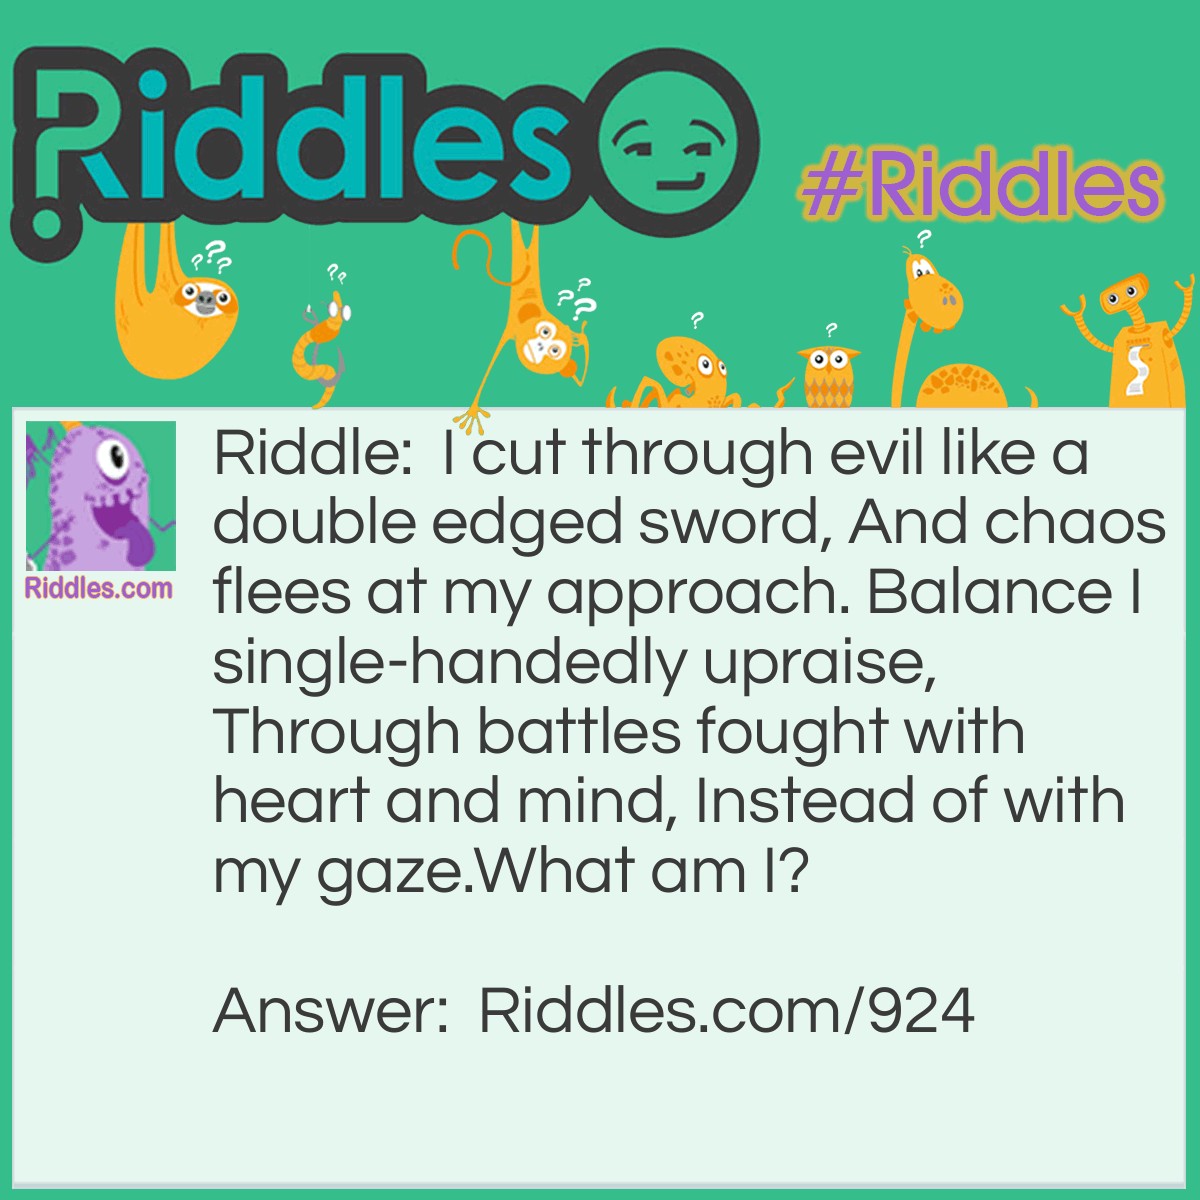 Riddle: I cut through evil like a double-edged sword, And chaos flees at my approach. Balance I single-handedly upraise, Through battles fought with heart and mind, Instead of with my gaze.
What am I? Answer: I am justice!